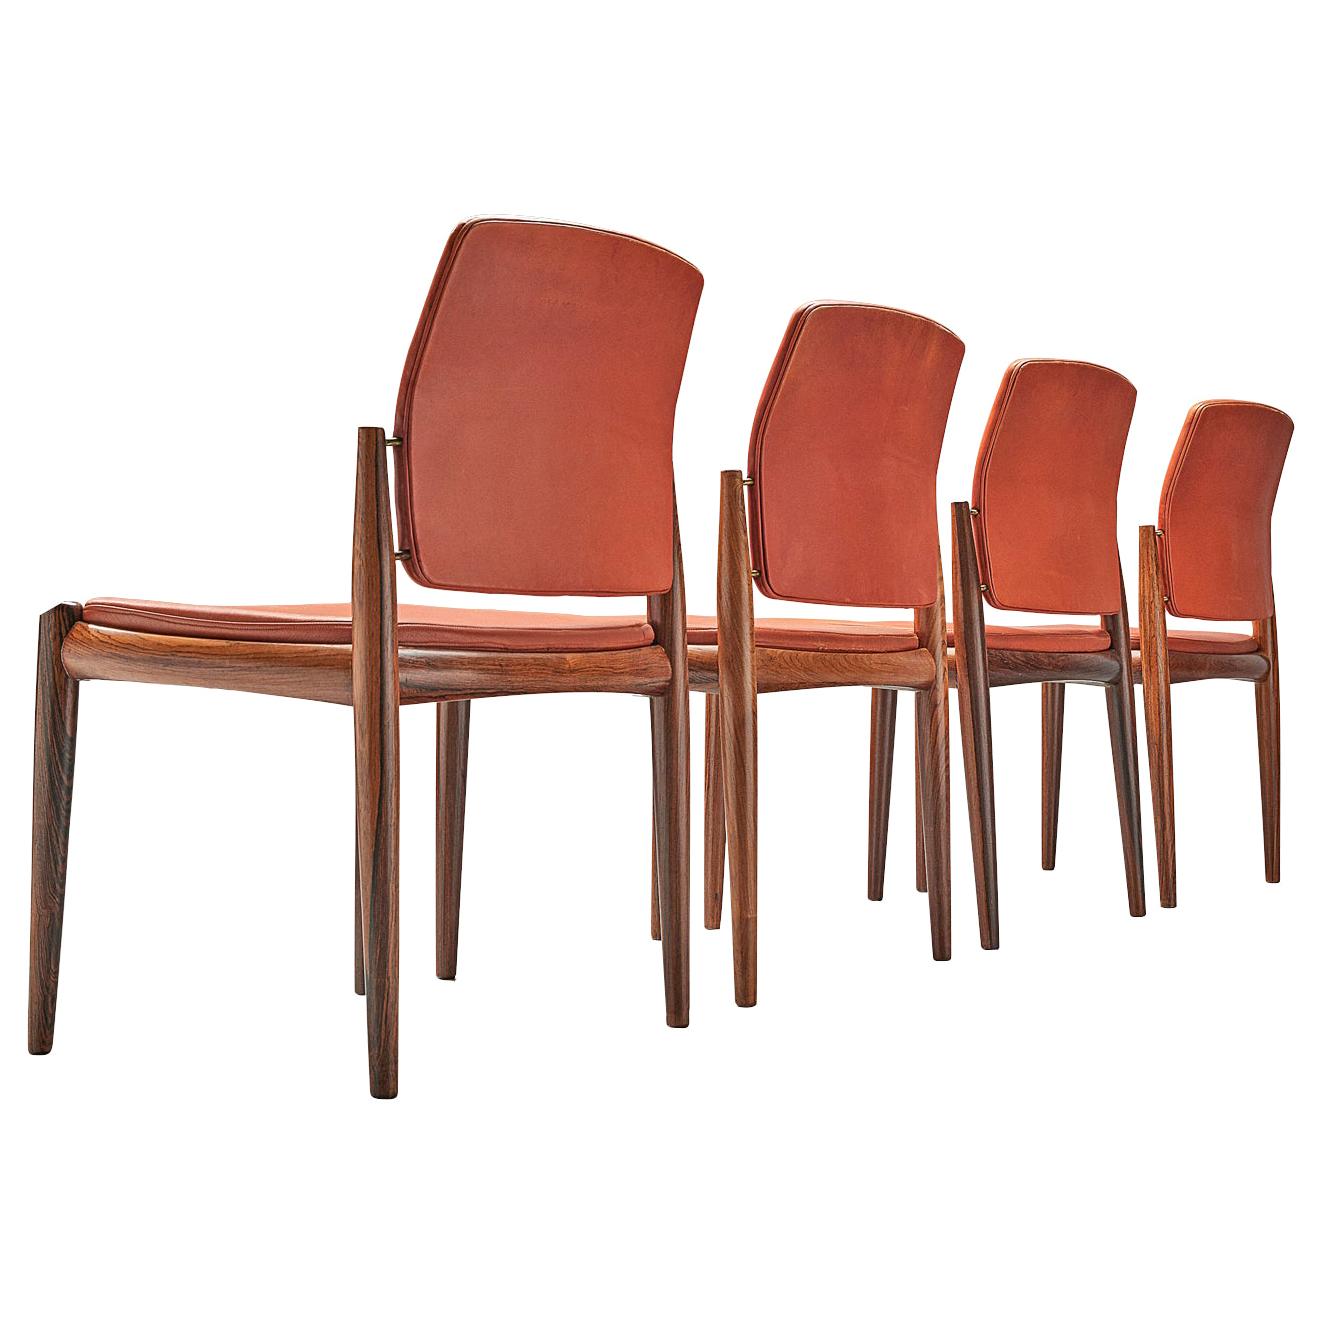 Set of Danish Dining Chairs in Hardwood and Leather